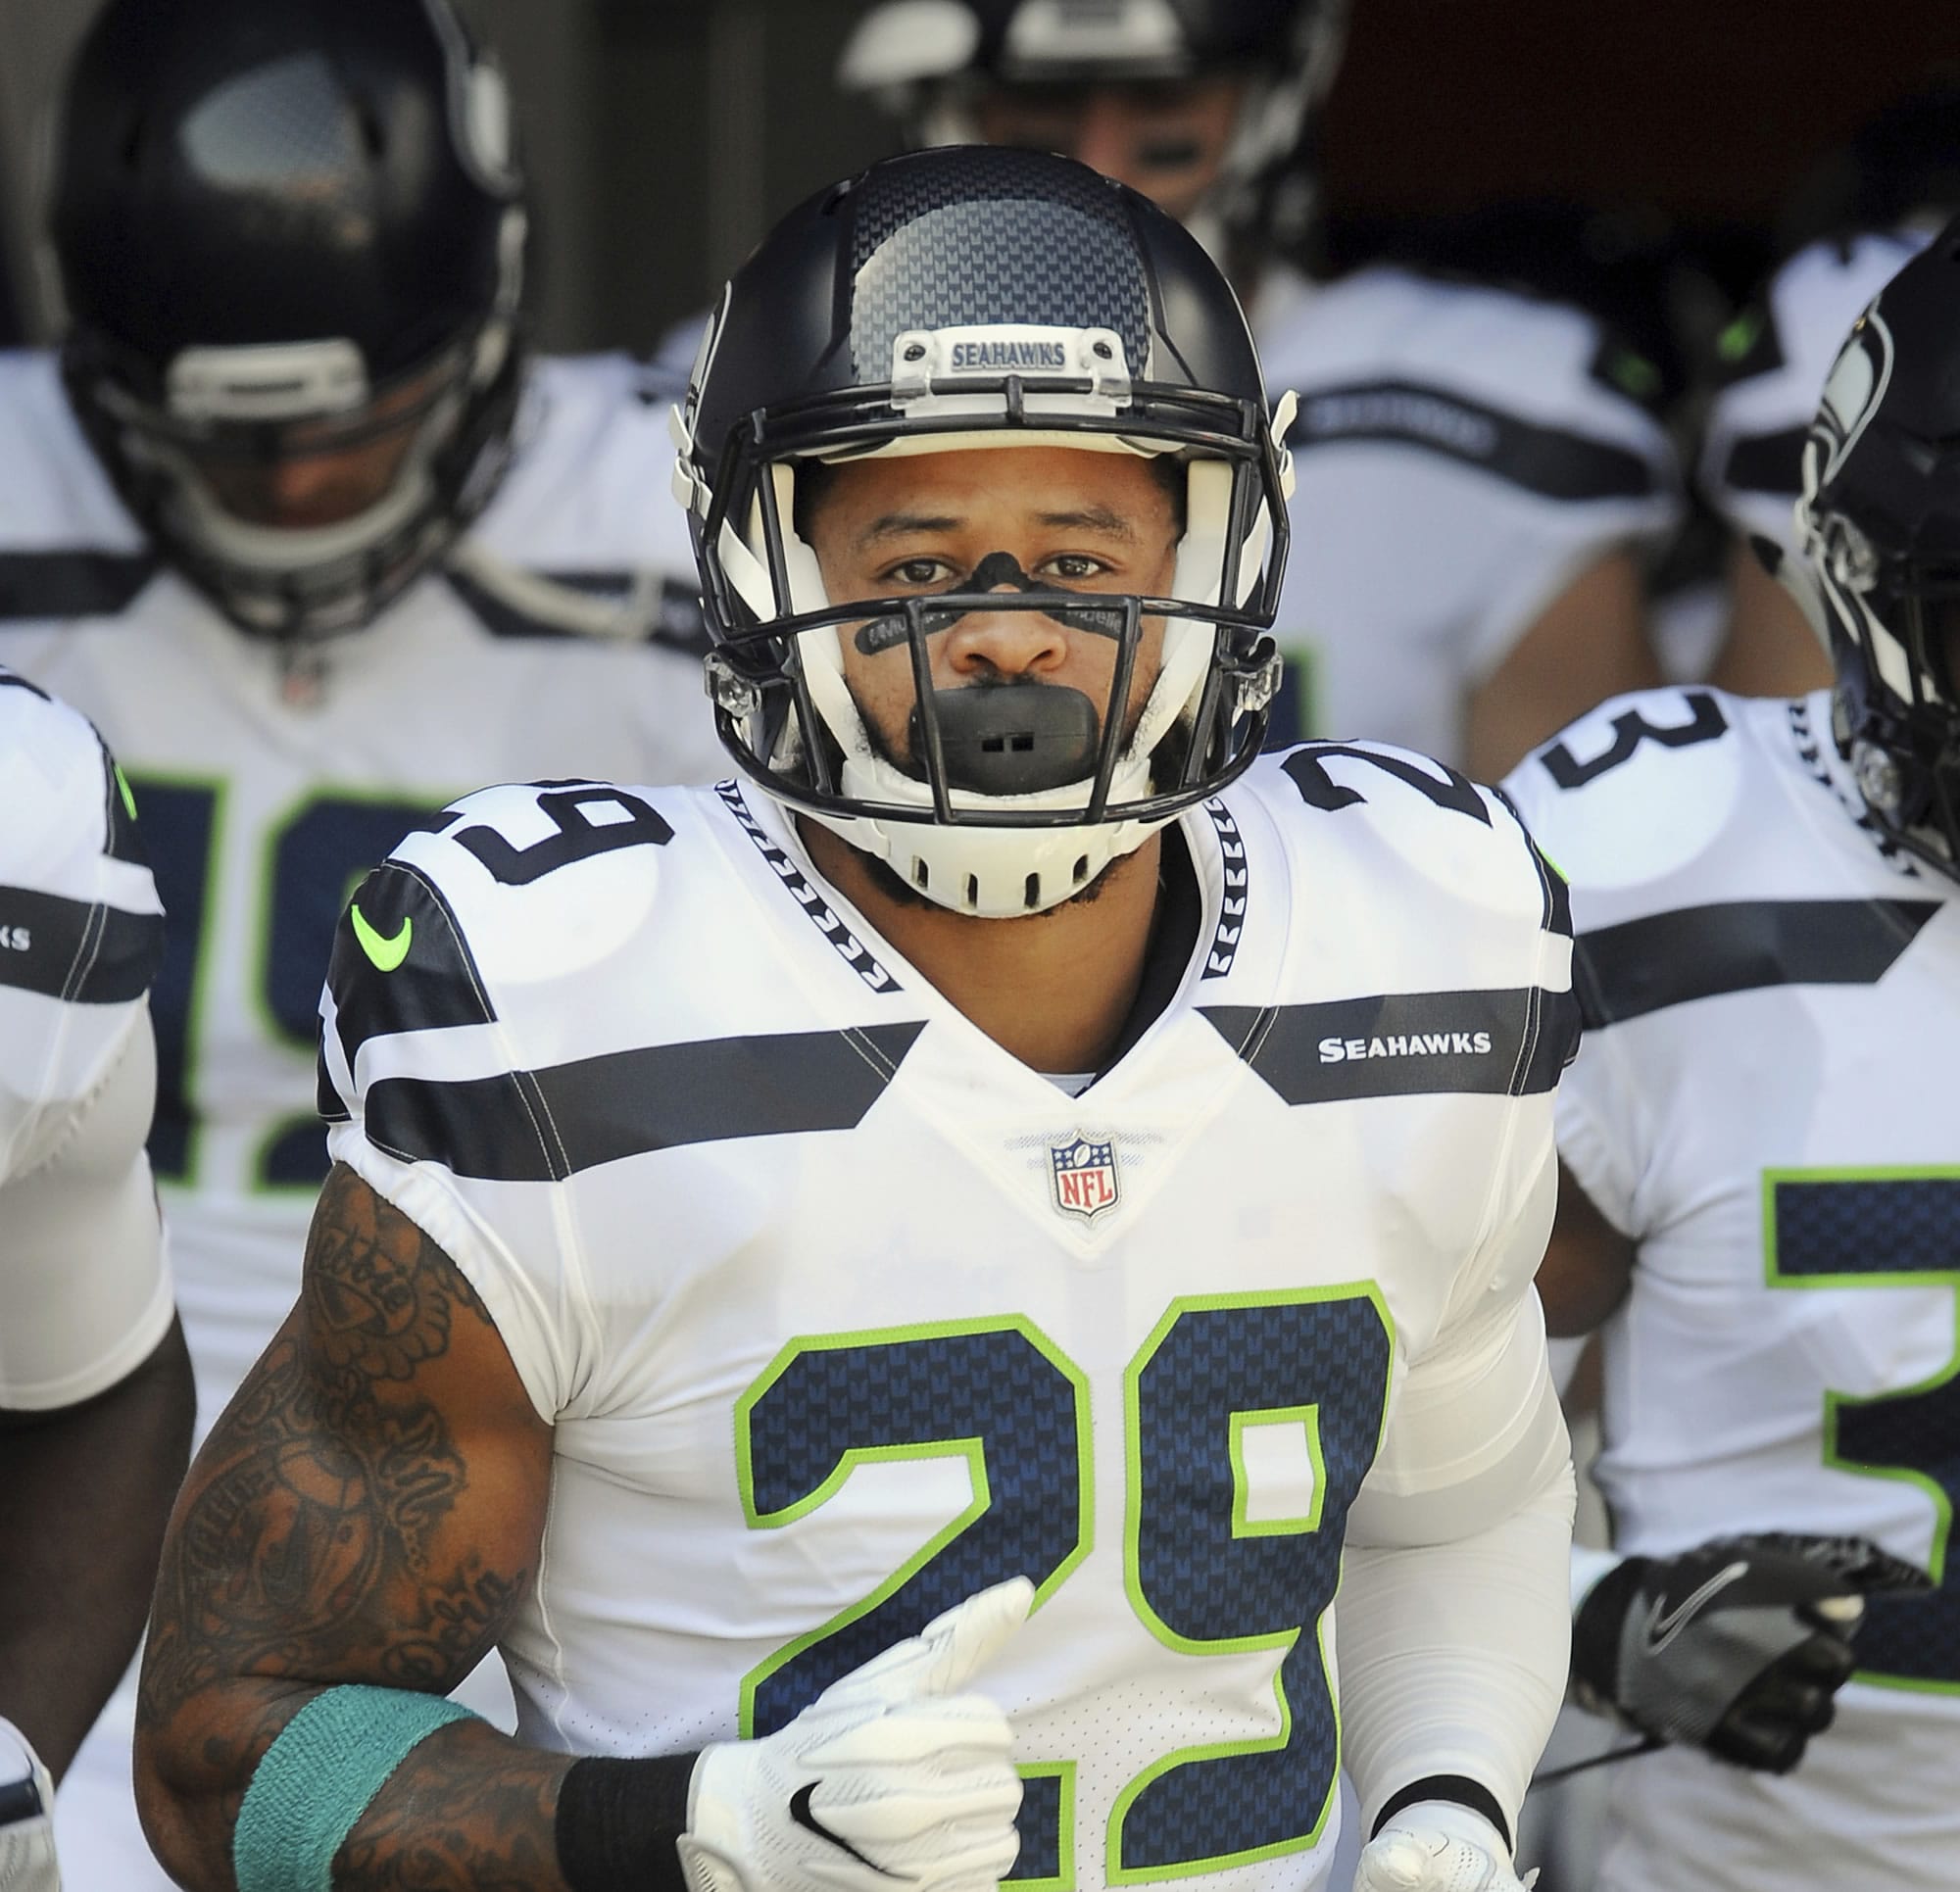 Seattle Seahawks free safety Earl Thomas has been ruled out with a hamstring injury for Sunday's game against the Washington Redskins.